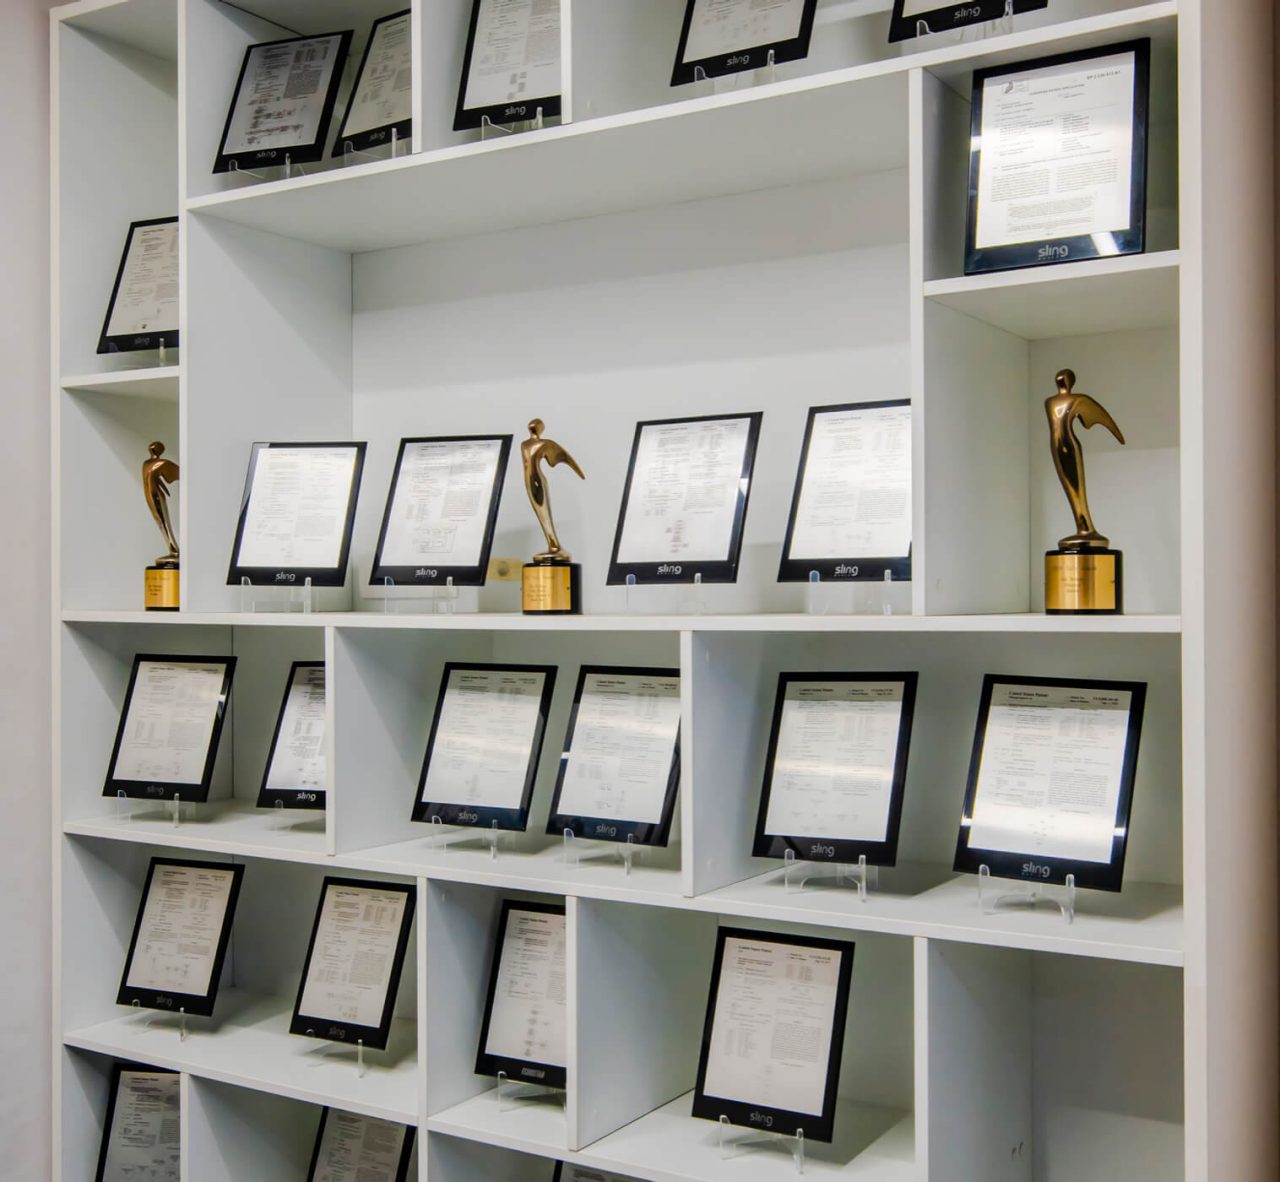 Display of DISH Network Technologies patent awards